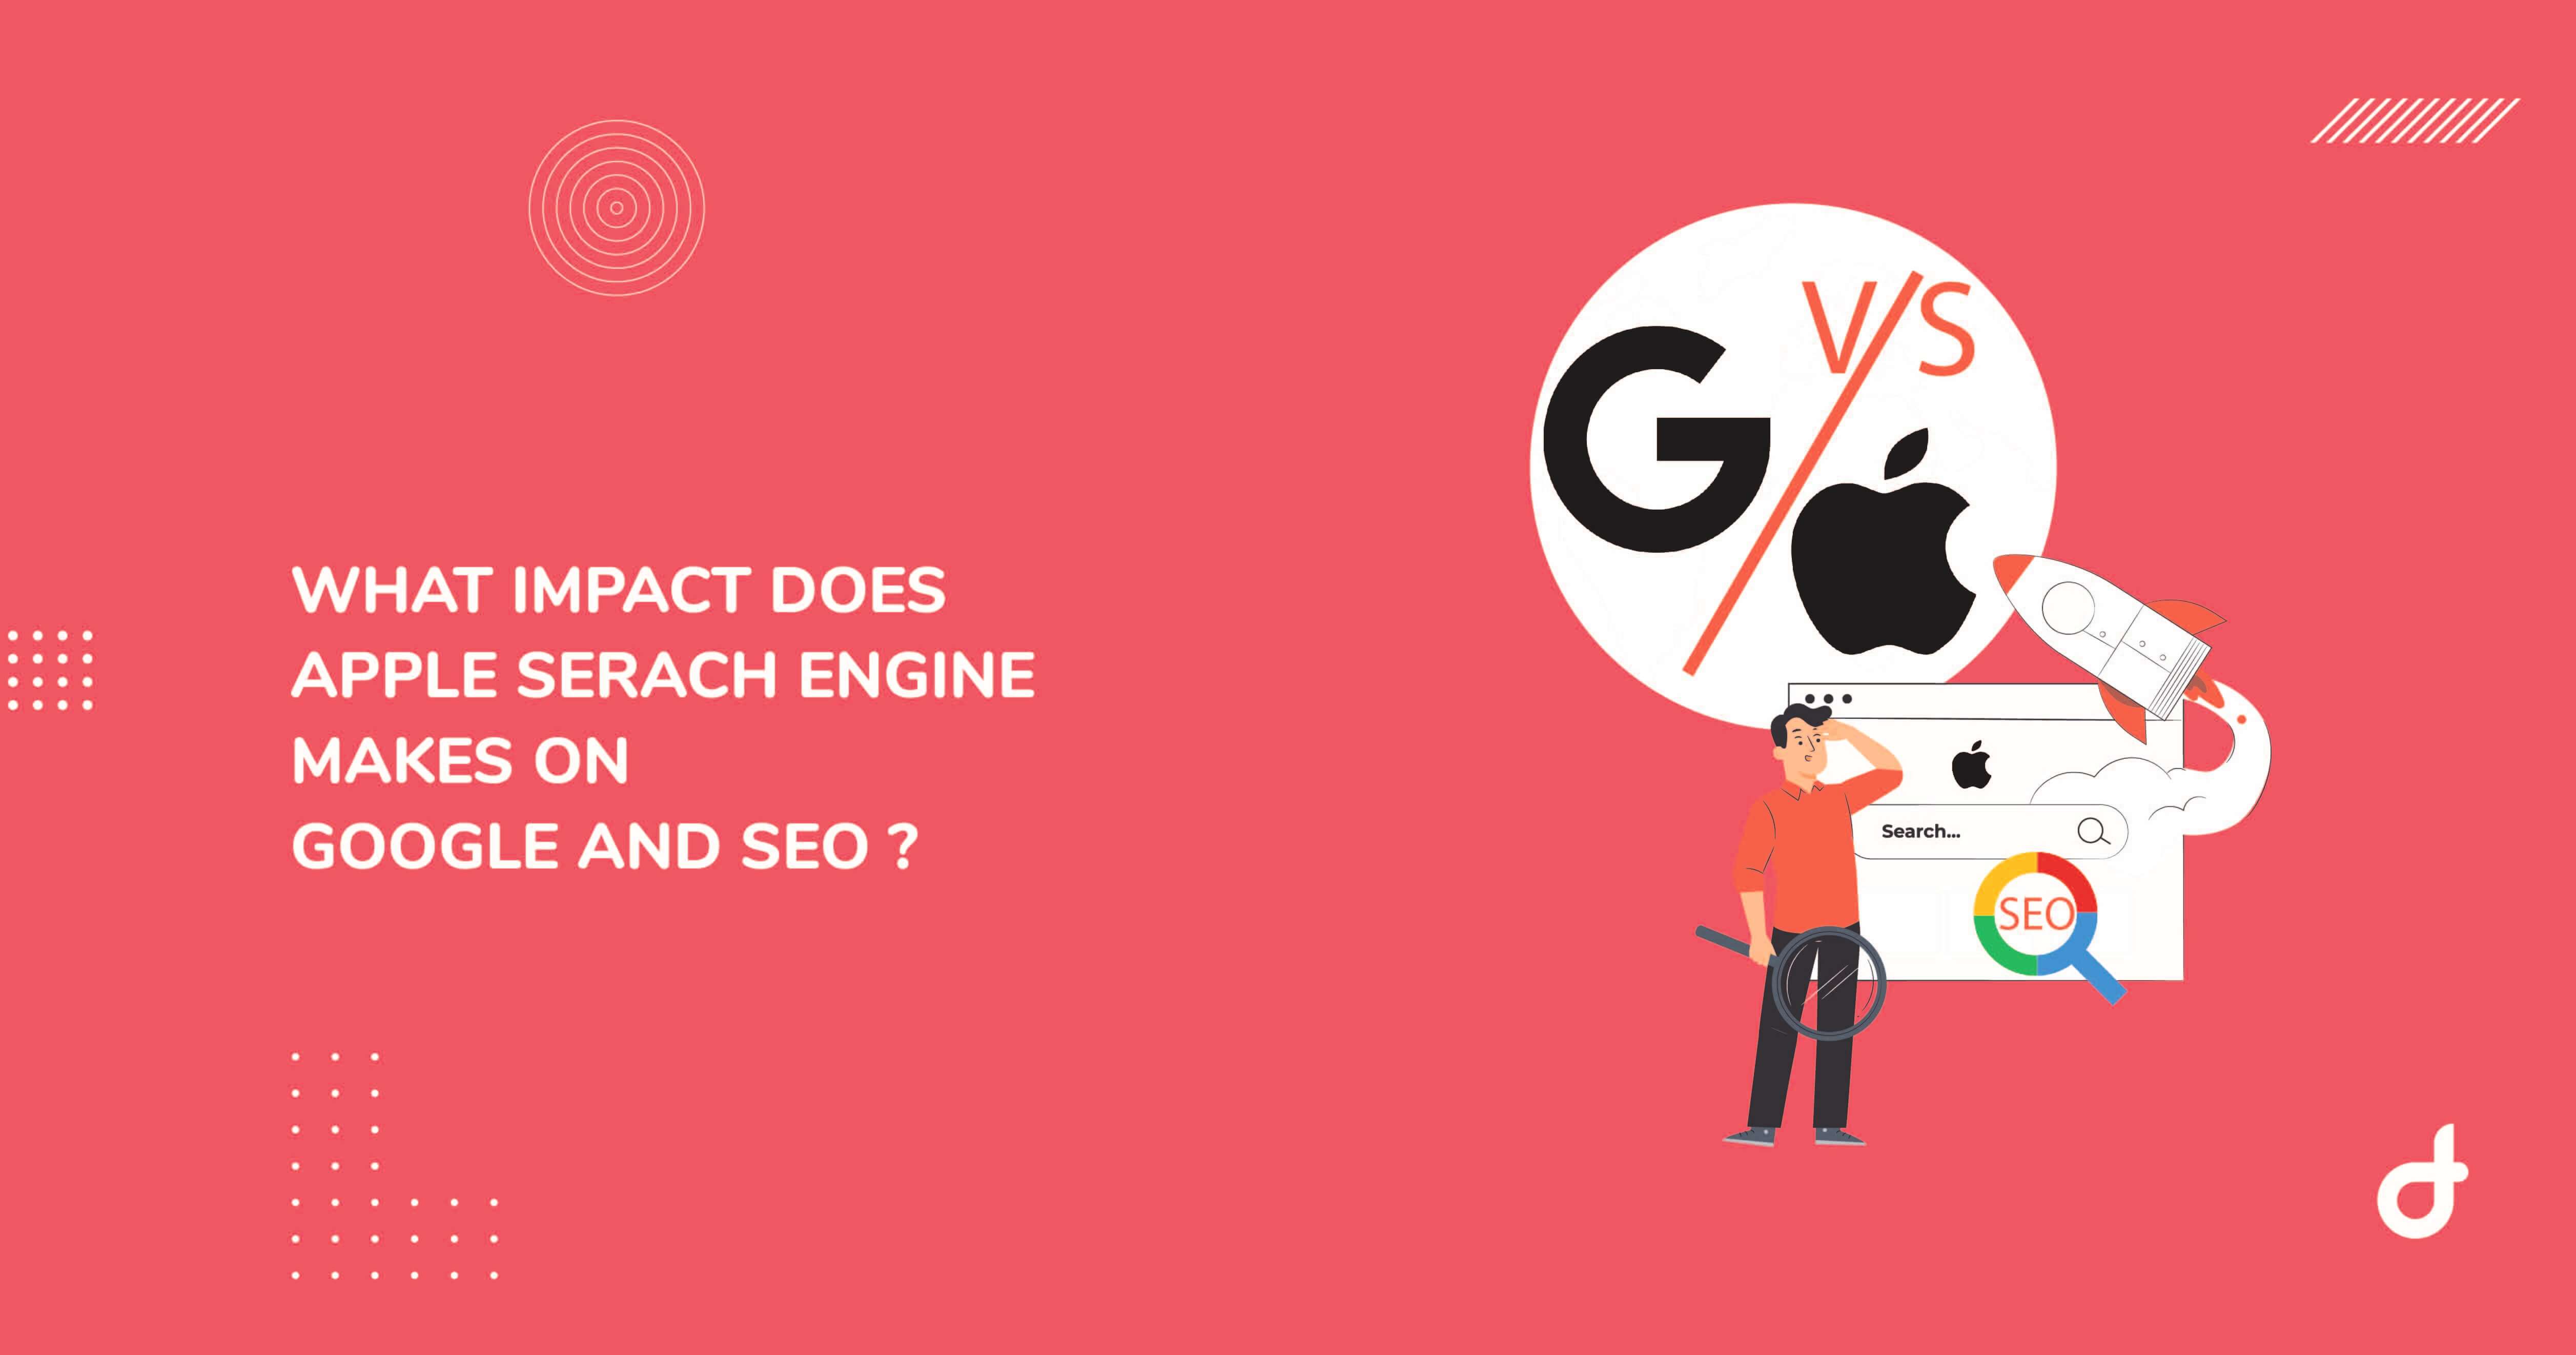 what impact does apple search engine make on google and seo